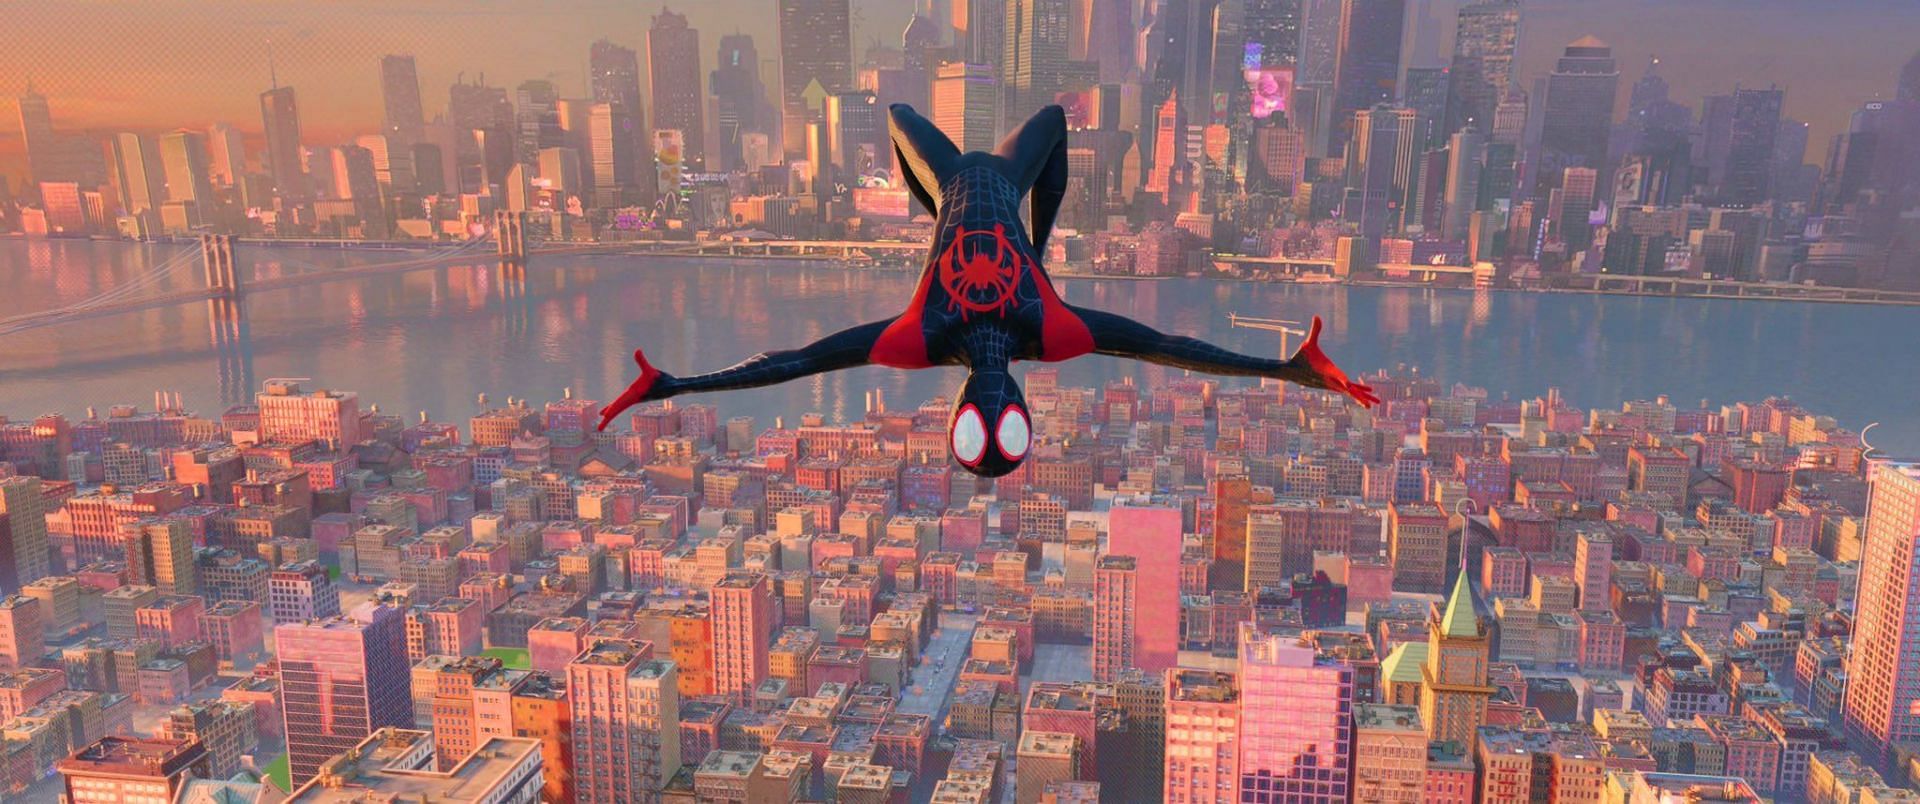 As fans eagerly await the arrival of Spider-Man: Into the Spider-Verse on Disney+, the quest for its streaming debut continues (Image via Sony Pictures)